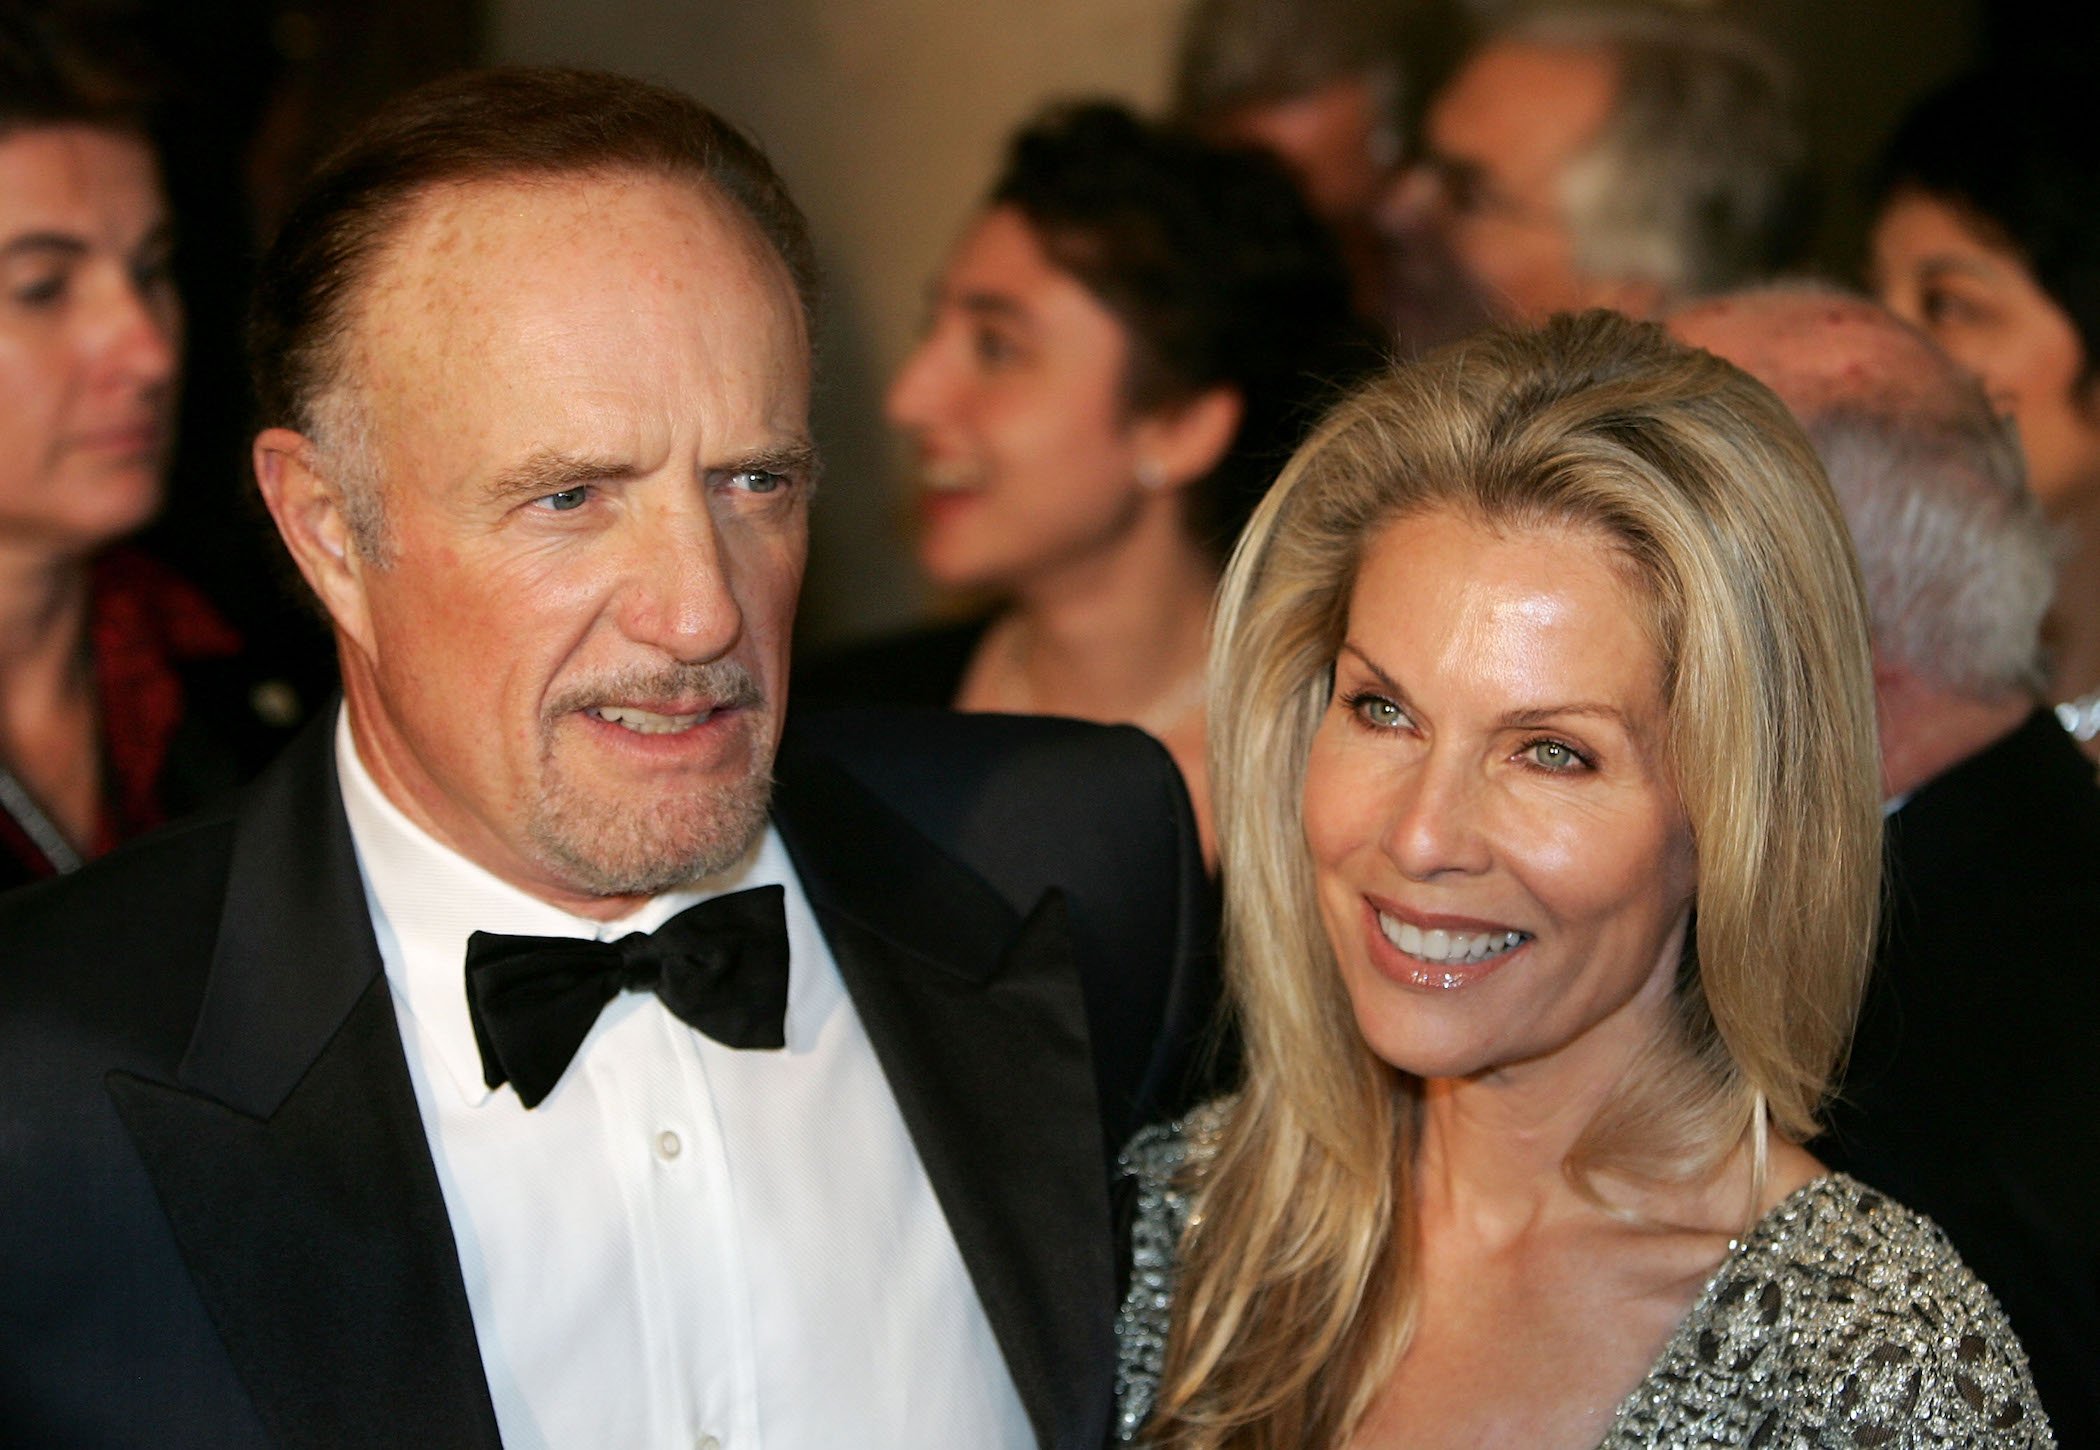 James Caan and ex-wife Linda Stokes at an event